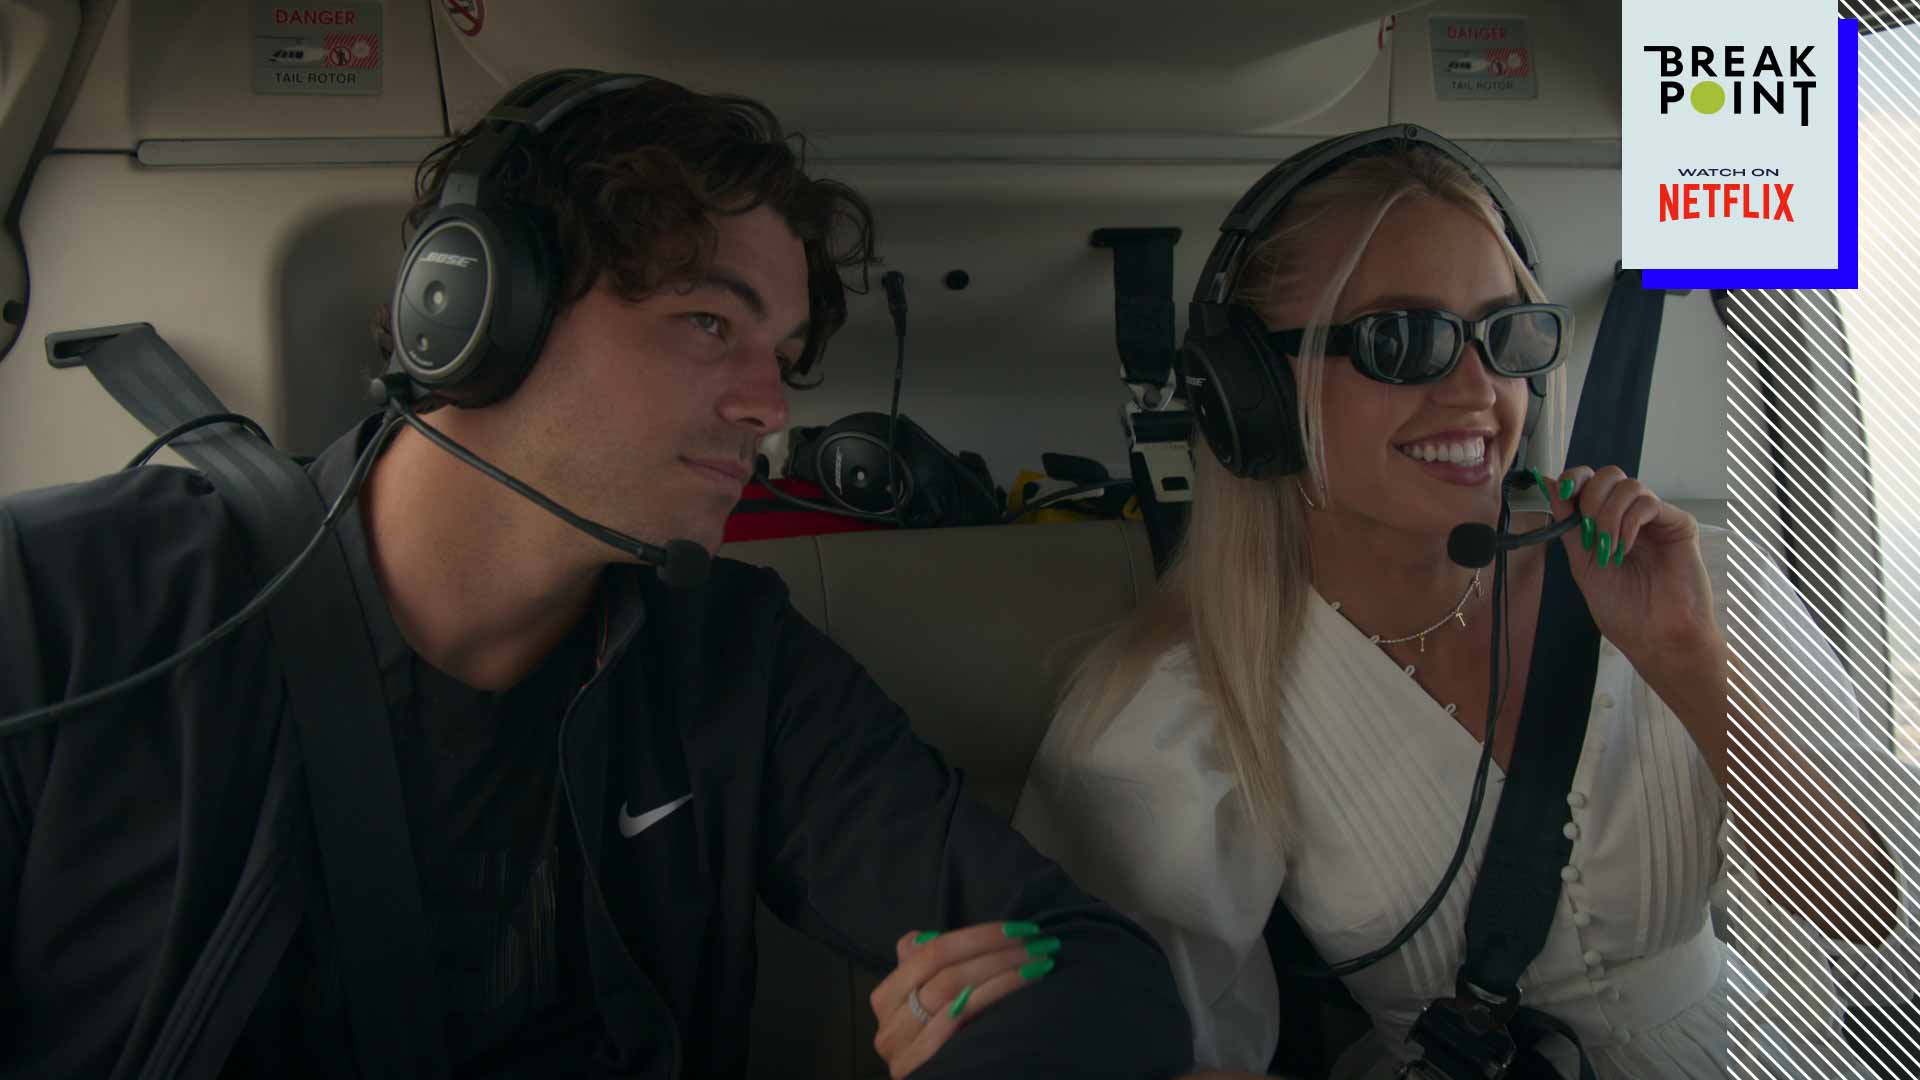 Taylor Fritz and girlfriend Morgan Riddle in a helicopter ahead of the 2022 US Open.